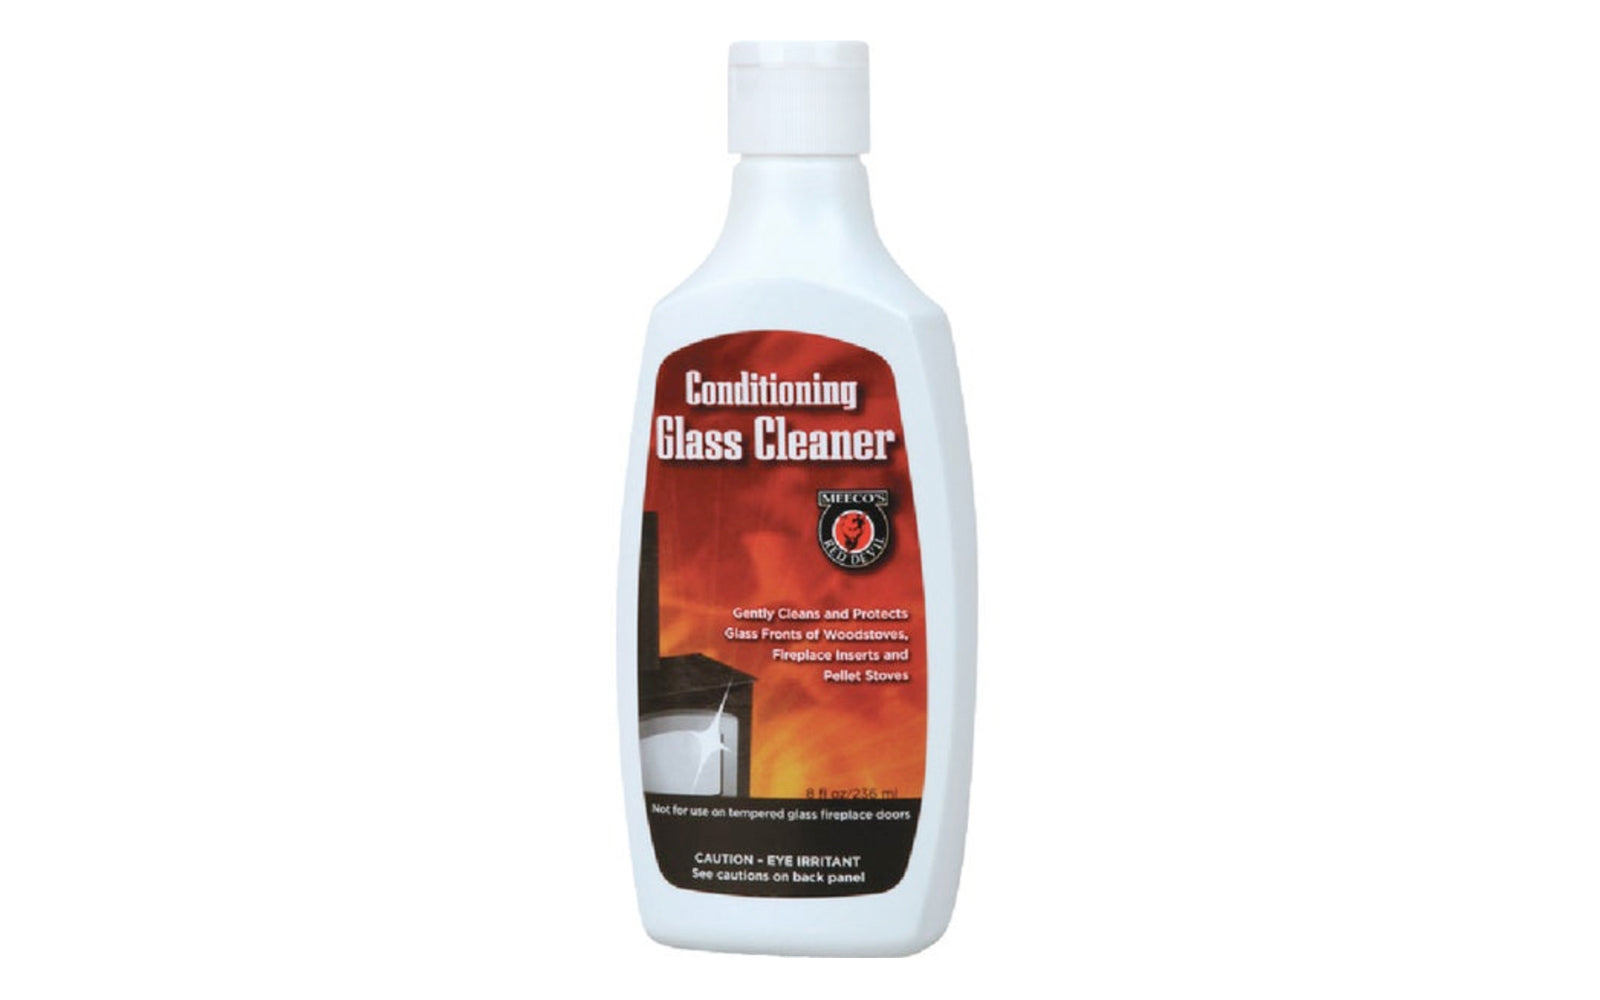 Meeco's Red Devil 8 oz Conditioning Glass Cleaner. Gently cleans and protects glass fronts of woodstoves, fireplace inserts, and pellet stoves. Nonscratching creme formula removes soot and creosote buildup. Leaves a protective silicone layer to make the next cleaning easier. Not for use on tempered glass doors. 8 oz. bottle.